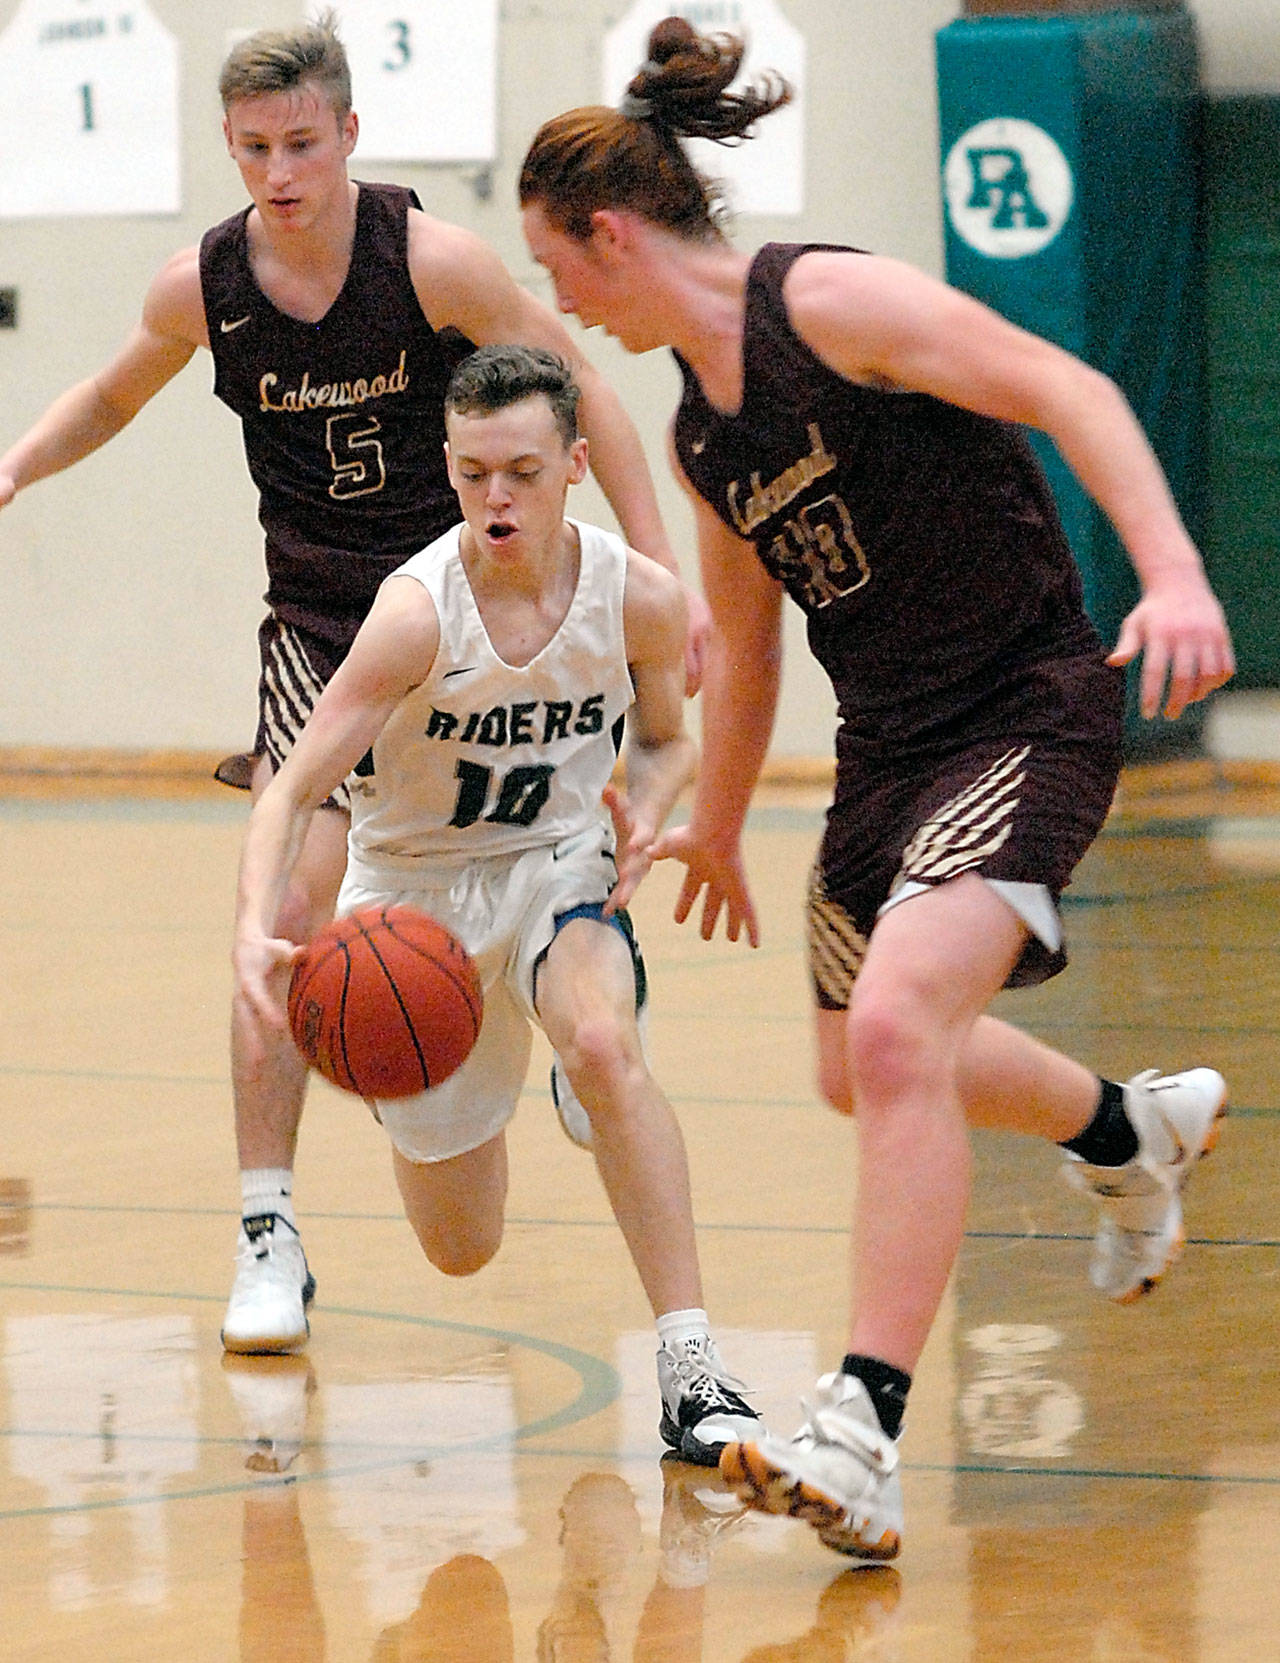 Port Angeles’ Dru Clark, center, drives down the court surrounded by Lakewood’s Shae Dixon, left, and Andrew Molloy during a 2019 game in Port Angeles. (Keith Thorpe/Peninsula Daily News file)